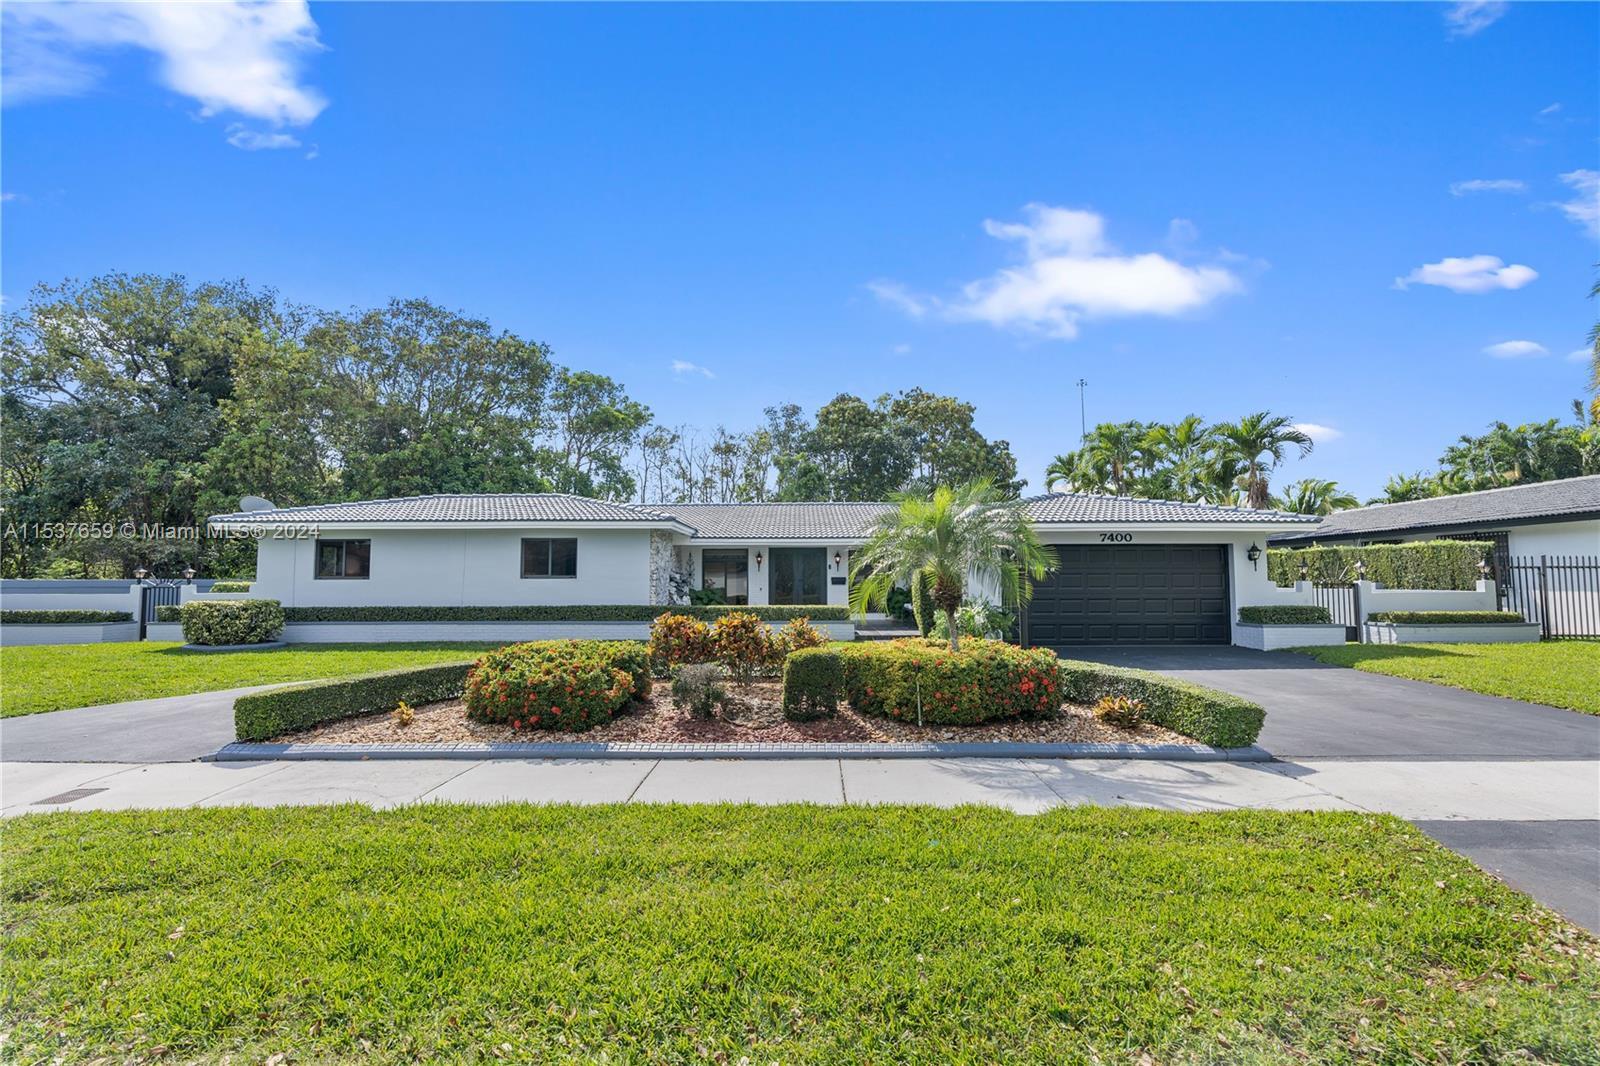 Photo of 7400 Sabal Dr in Miami Lakes, FL